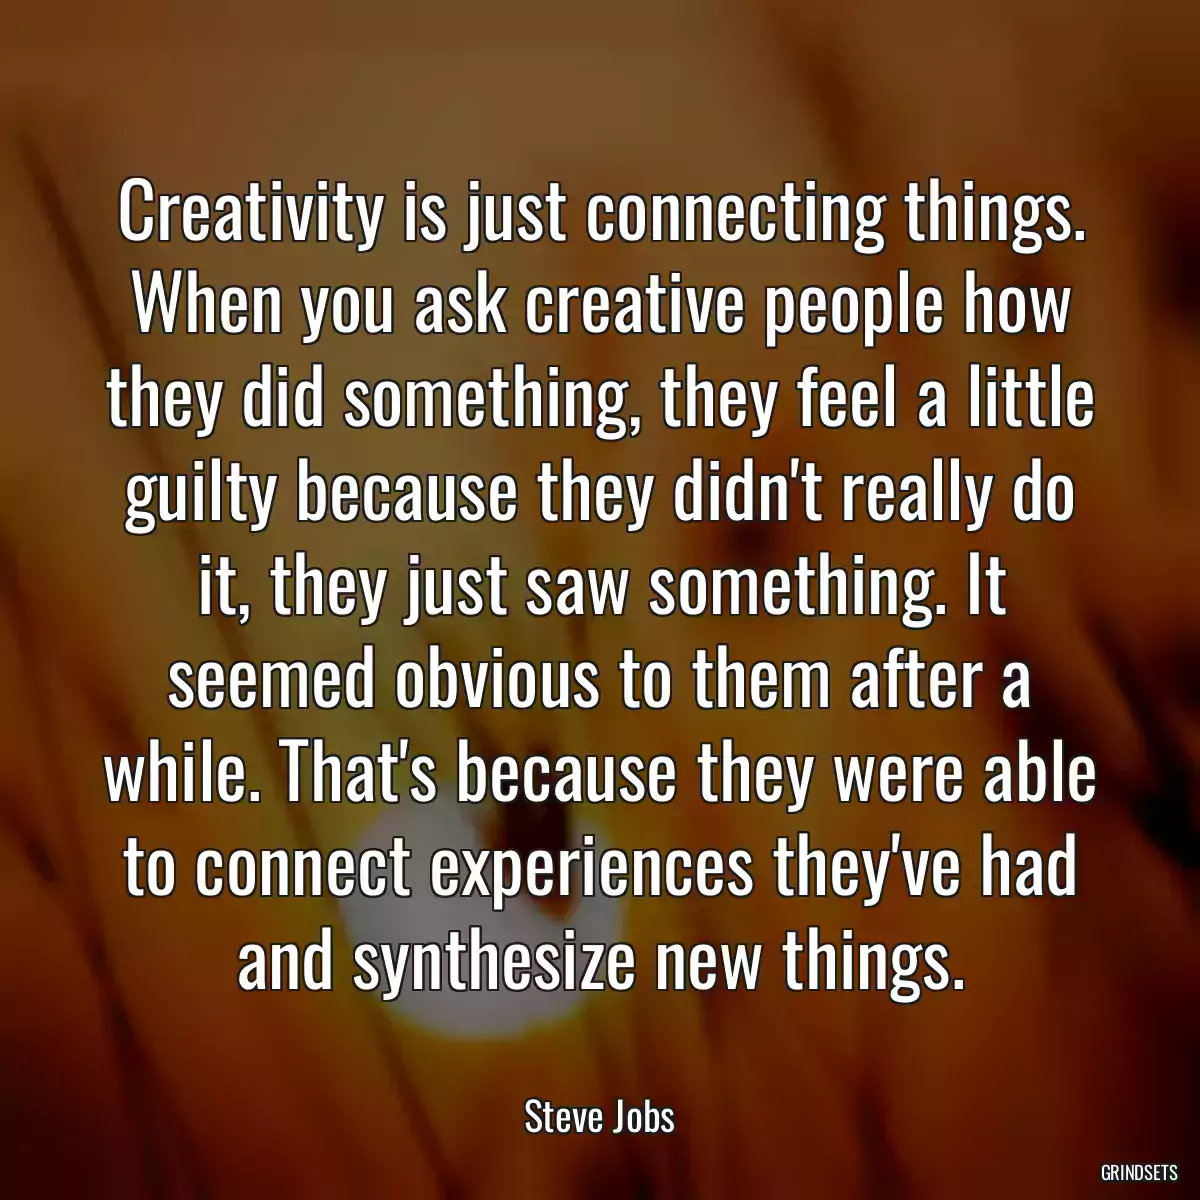 Creativity is just connecting things. When you ask creative people how they did something, they feel a little guilty because they didn\'t really do it, they just saw something. It seemed obvious to them after a while. That\'s because they were able to connect experiences they\'ve had and synthesize new things.